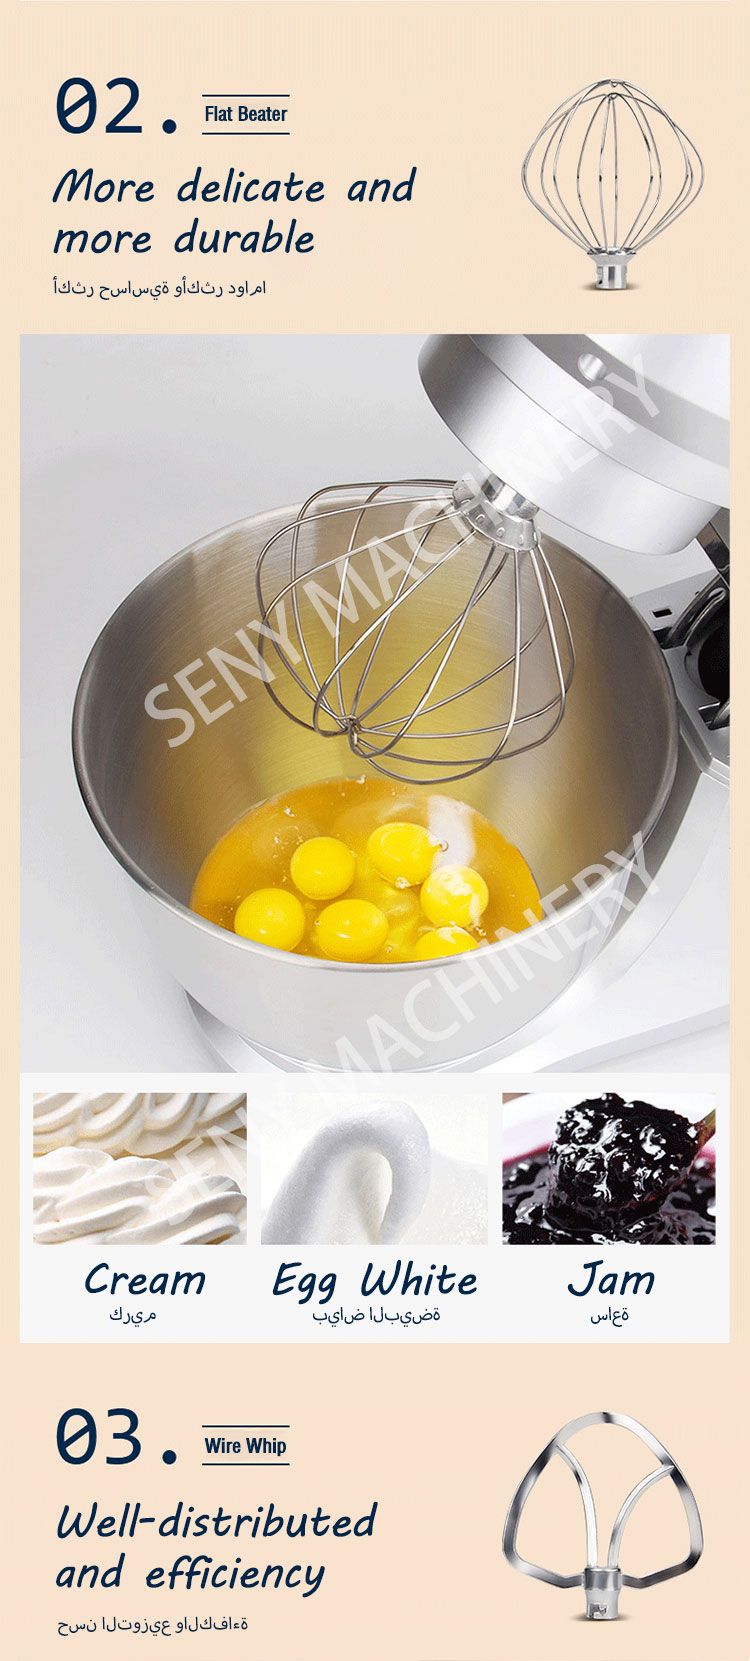 High Quality 30/60/80L Egg Flour Kneader Electric Food Dough Mixer for Bread Cake